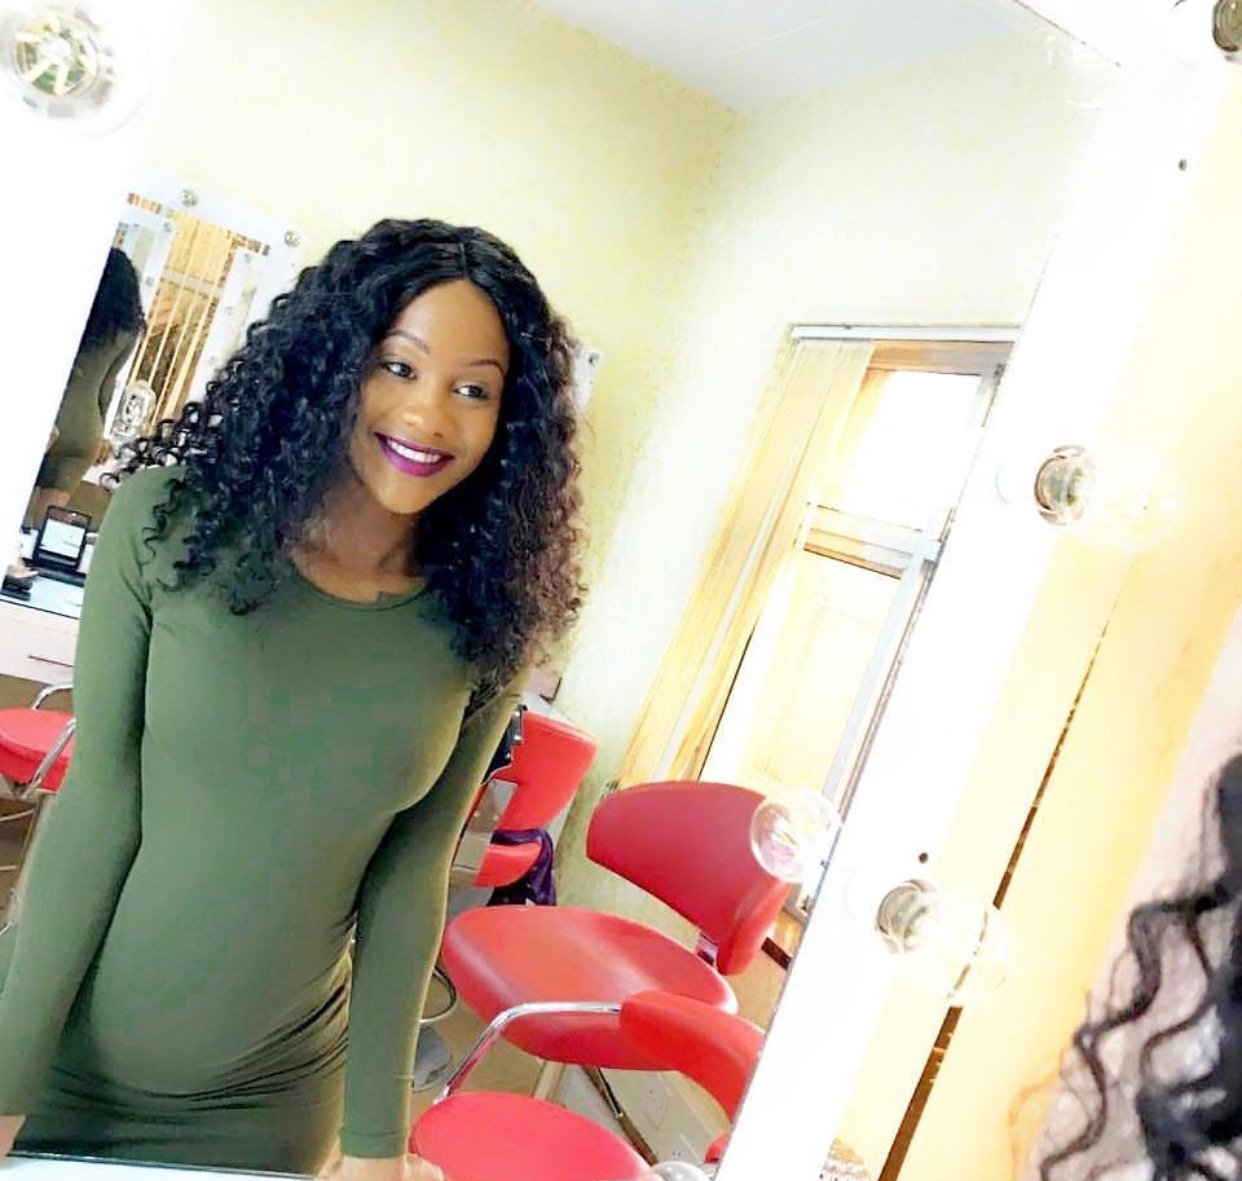 Baby onboard: Prezzo’s ex girlfriend flaunts her growing baby bump for the first time